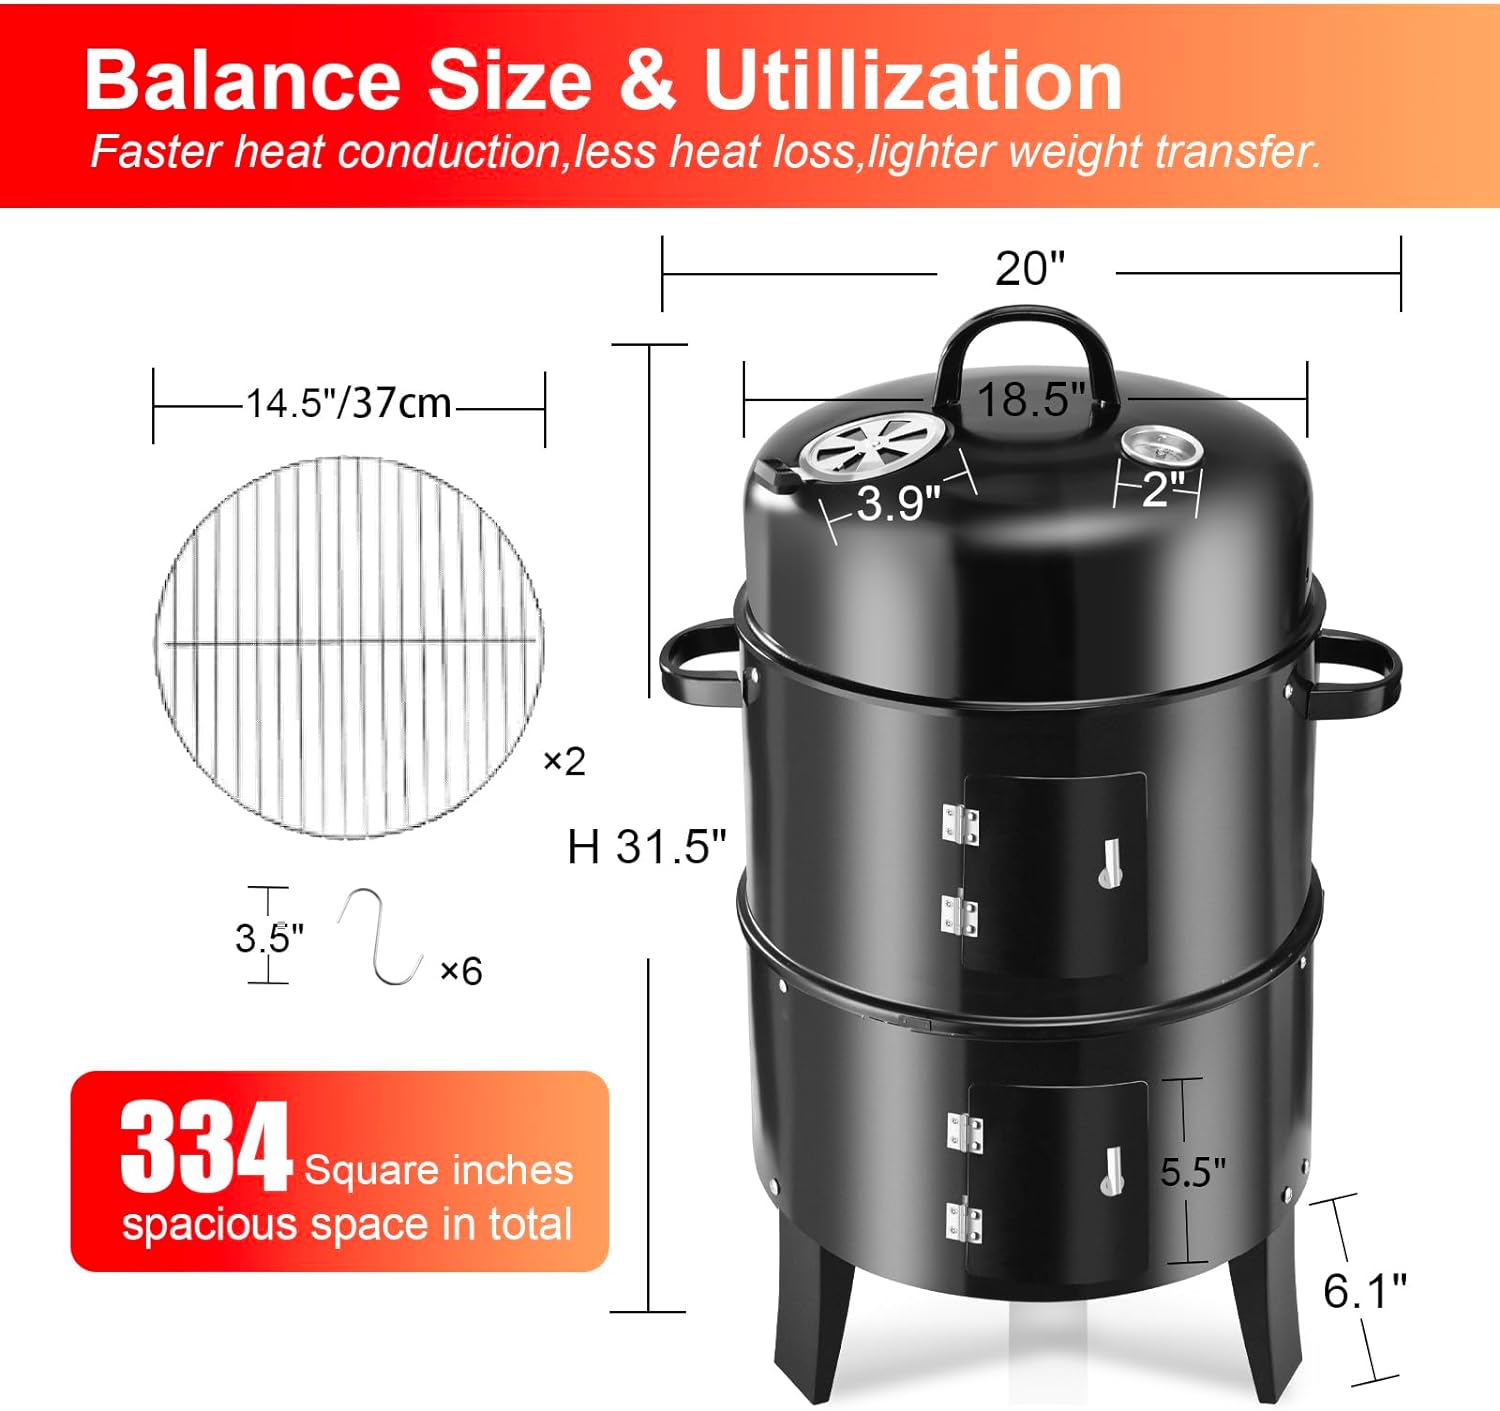 RYHOFOUD 19Inch Round Charcoal Smoker Grill,Heavy-Duty BBQ Smoker for Outdoor Smoking-Vertical Multi-Layer Pellet Smoker Ideal for Meats-Offset Charcoal Grill with Thermometer  S-Shaped Hook,Black